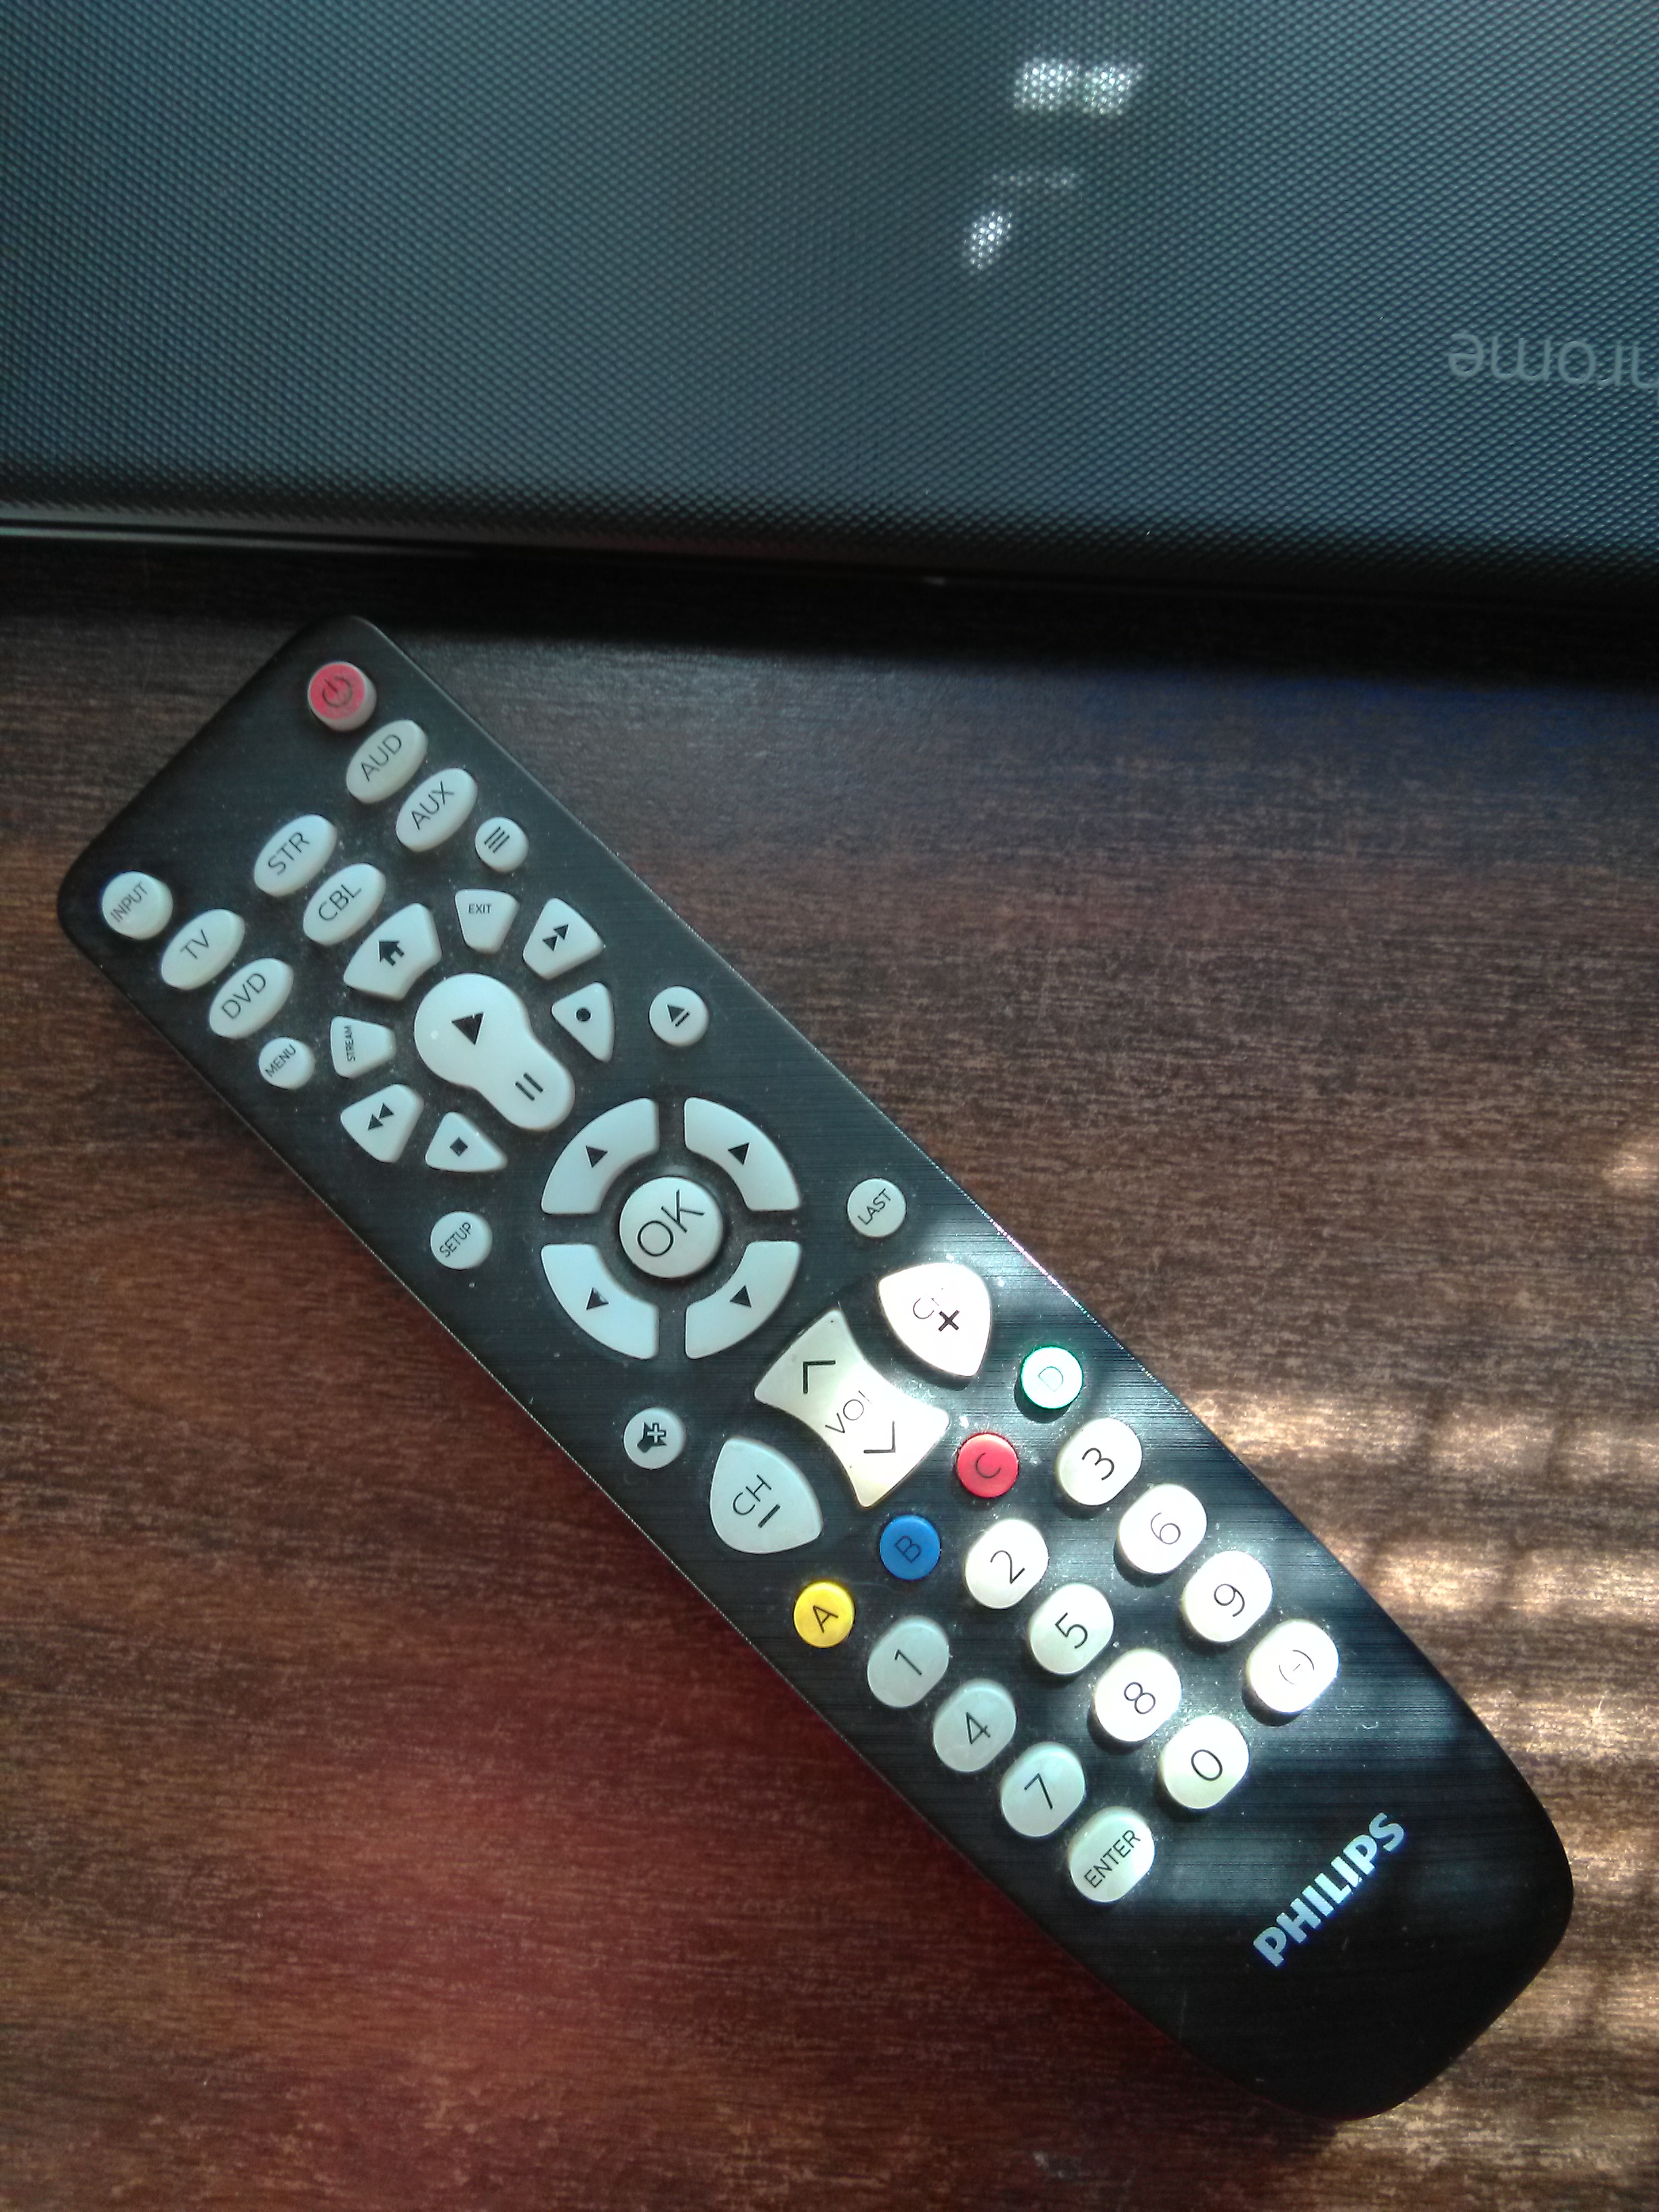 How to use roku remote voice control